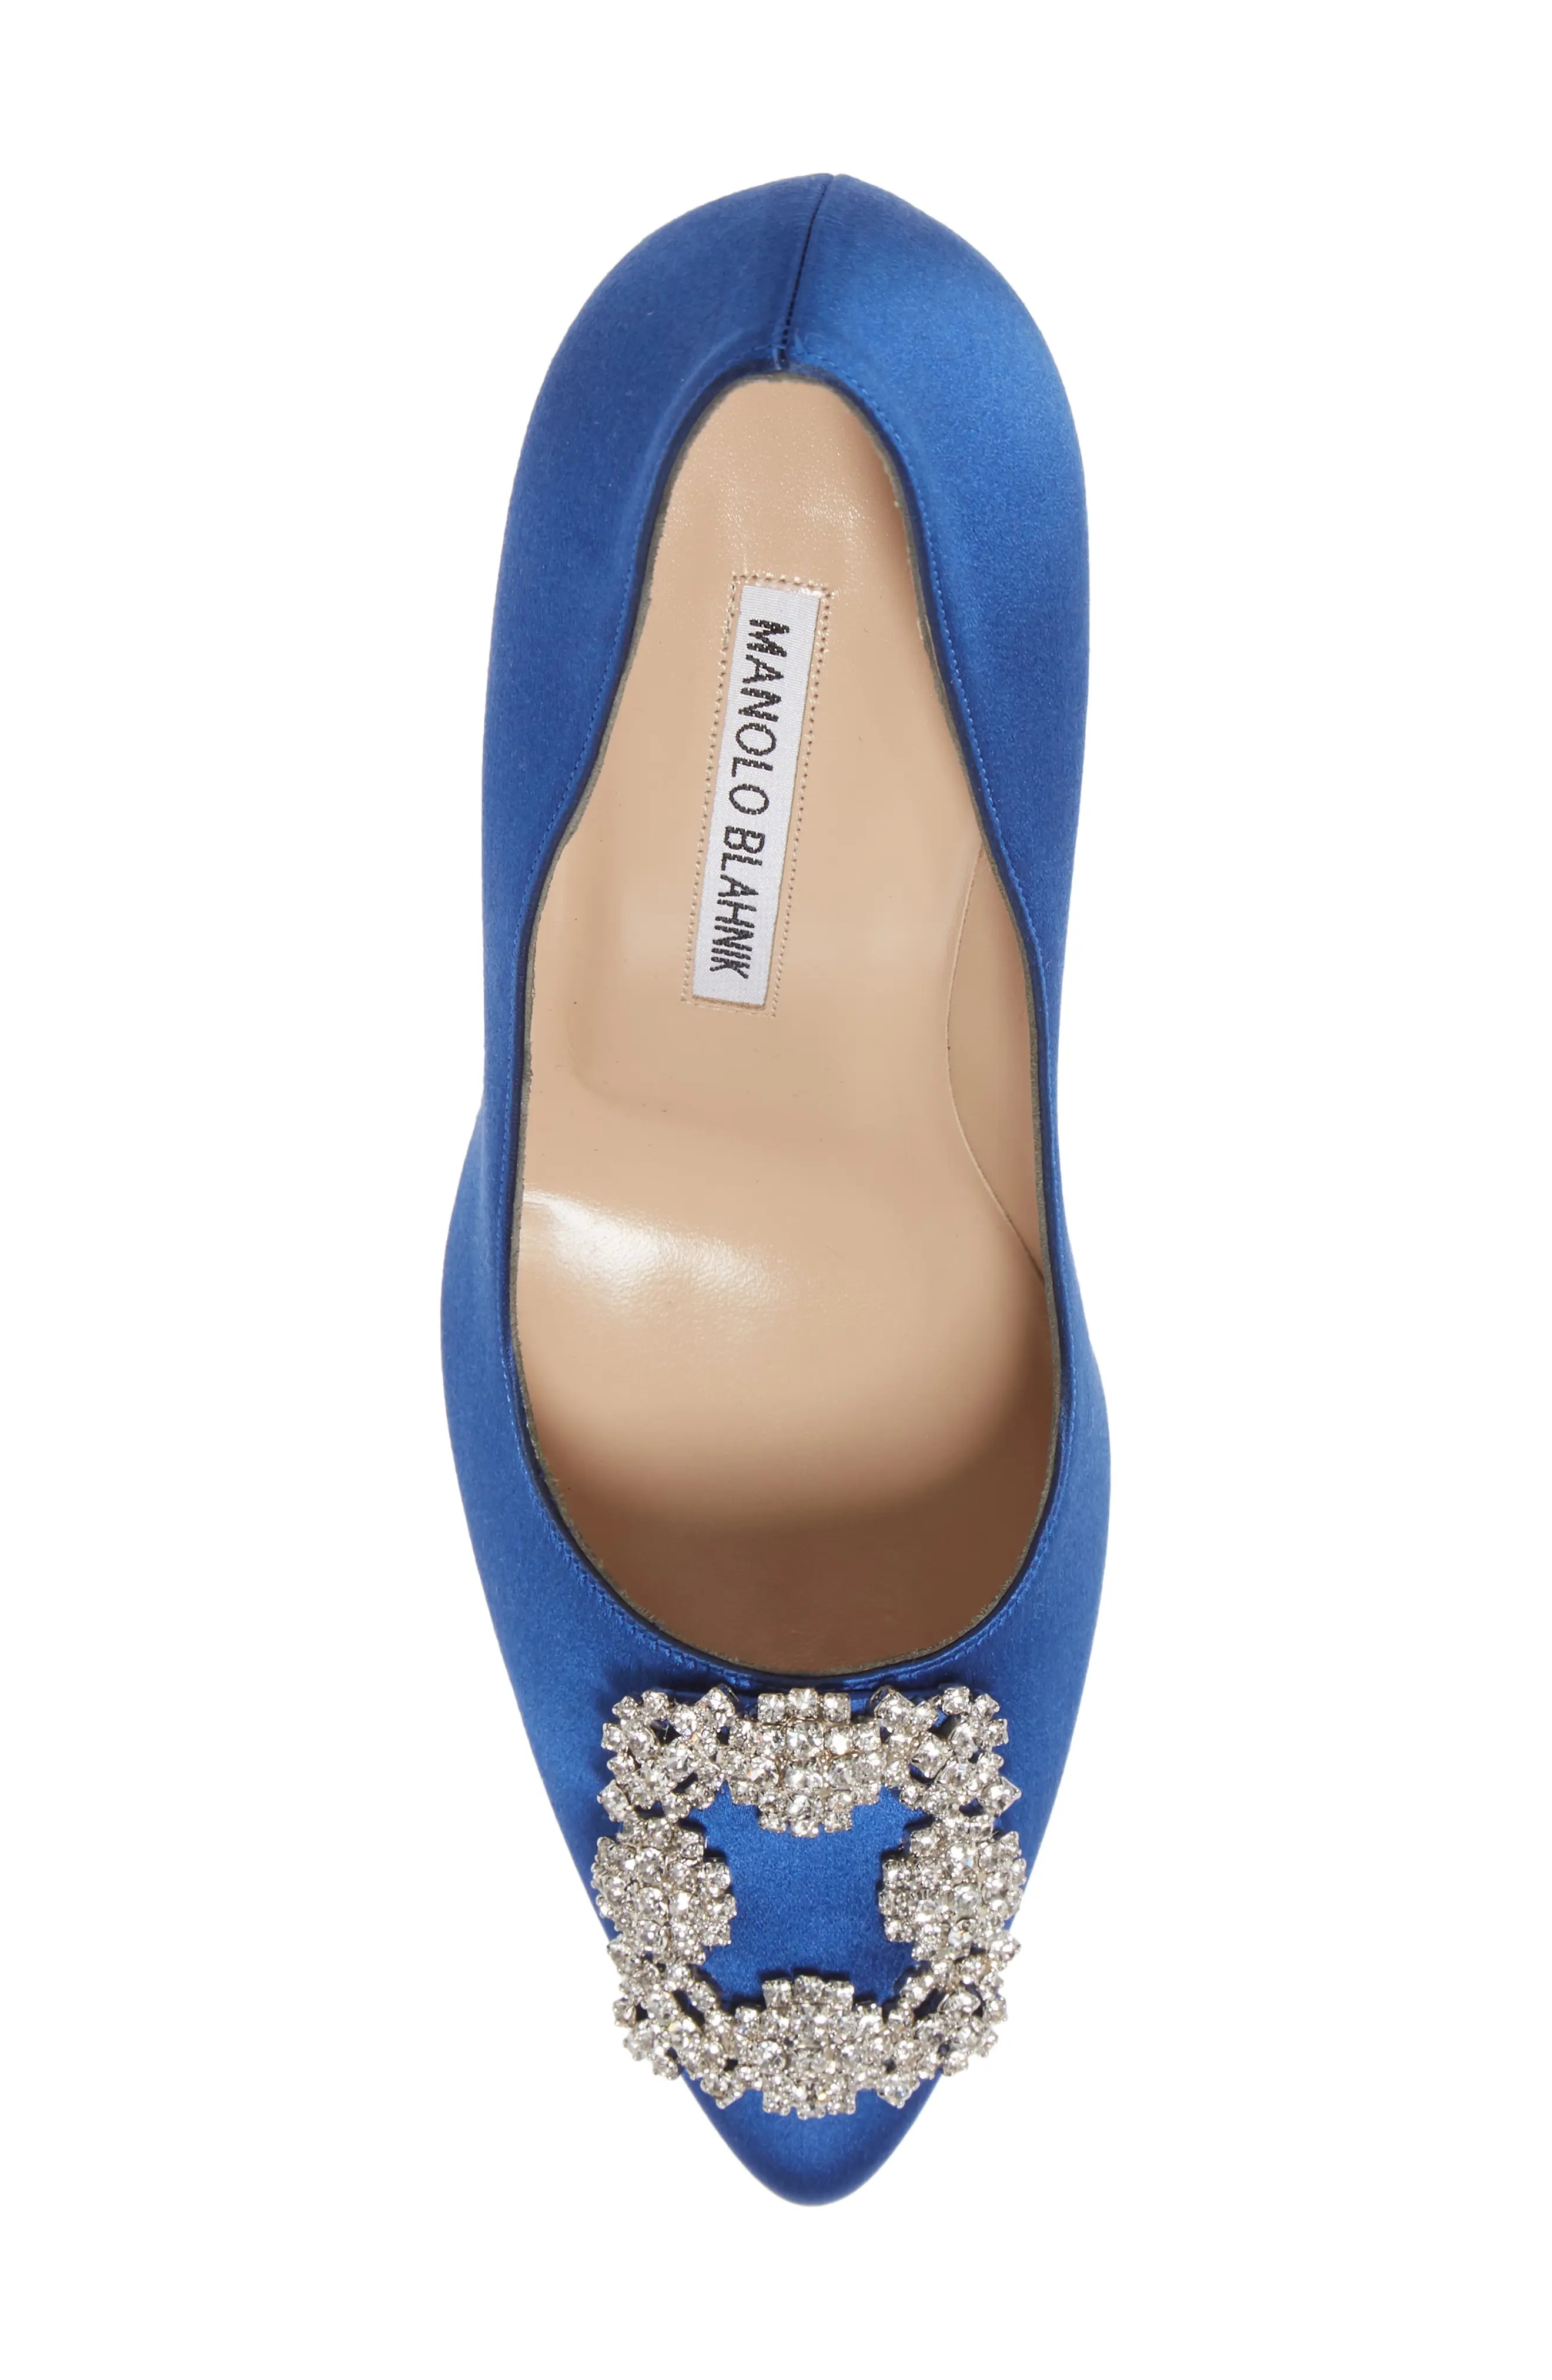 Hangisi Crystal Buckle Pump in Blue Satin Clear/Buckle - 5